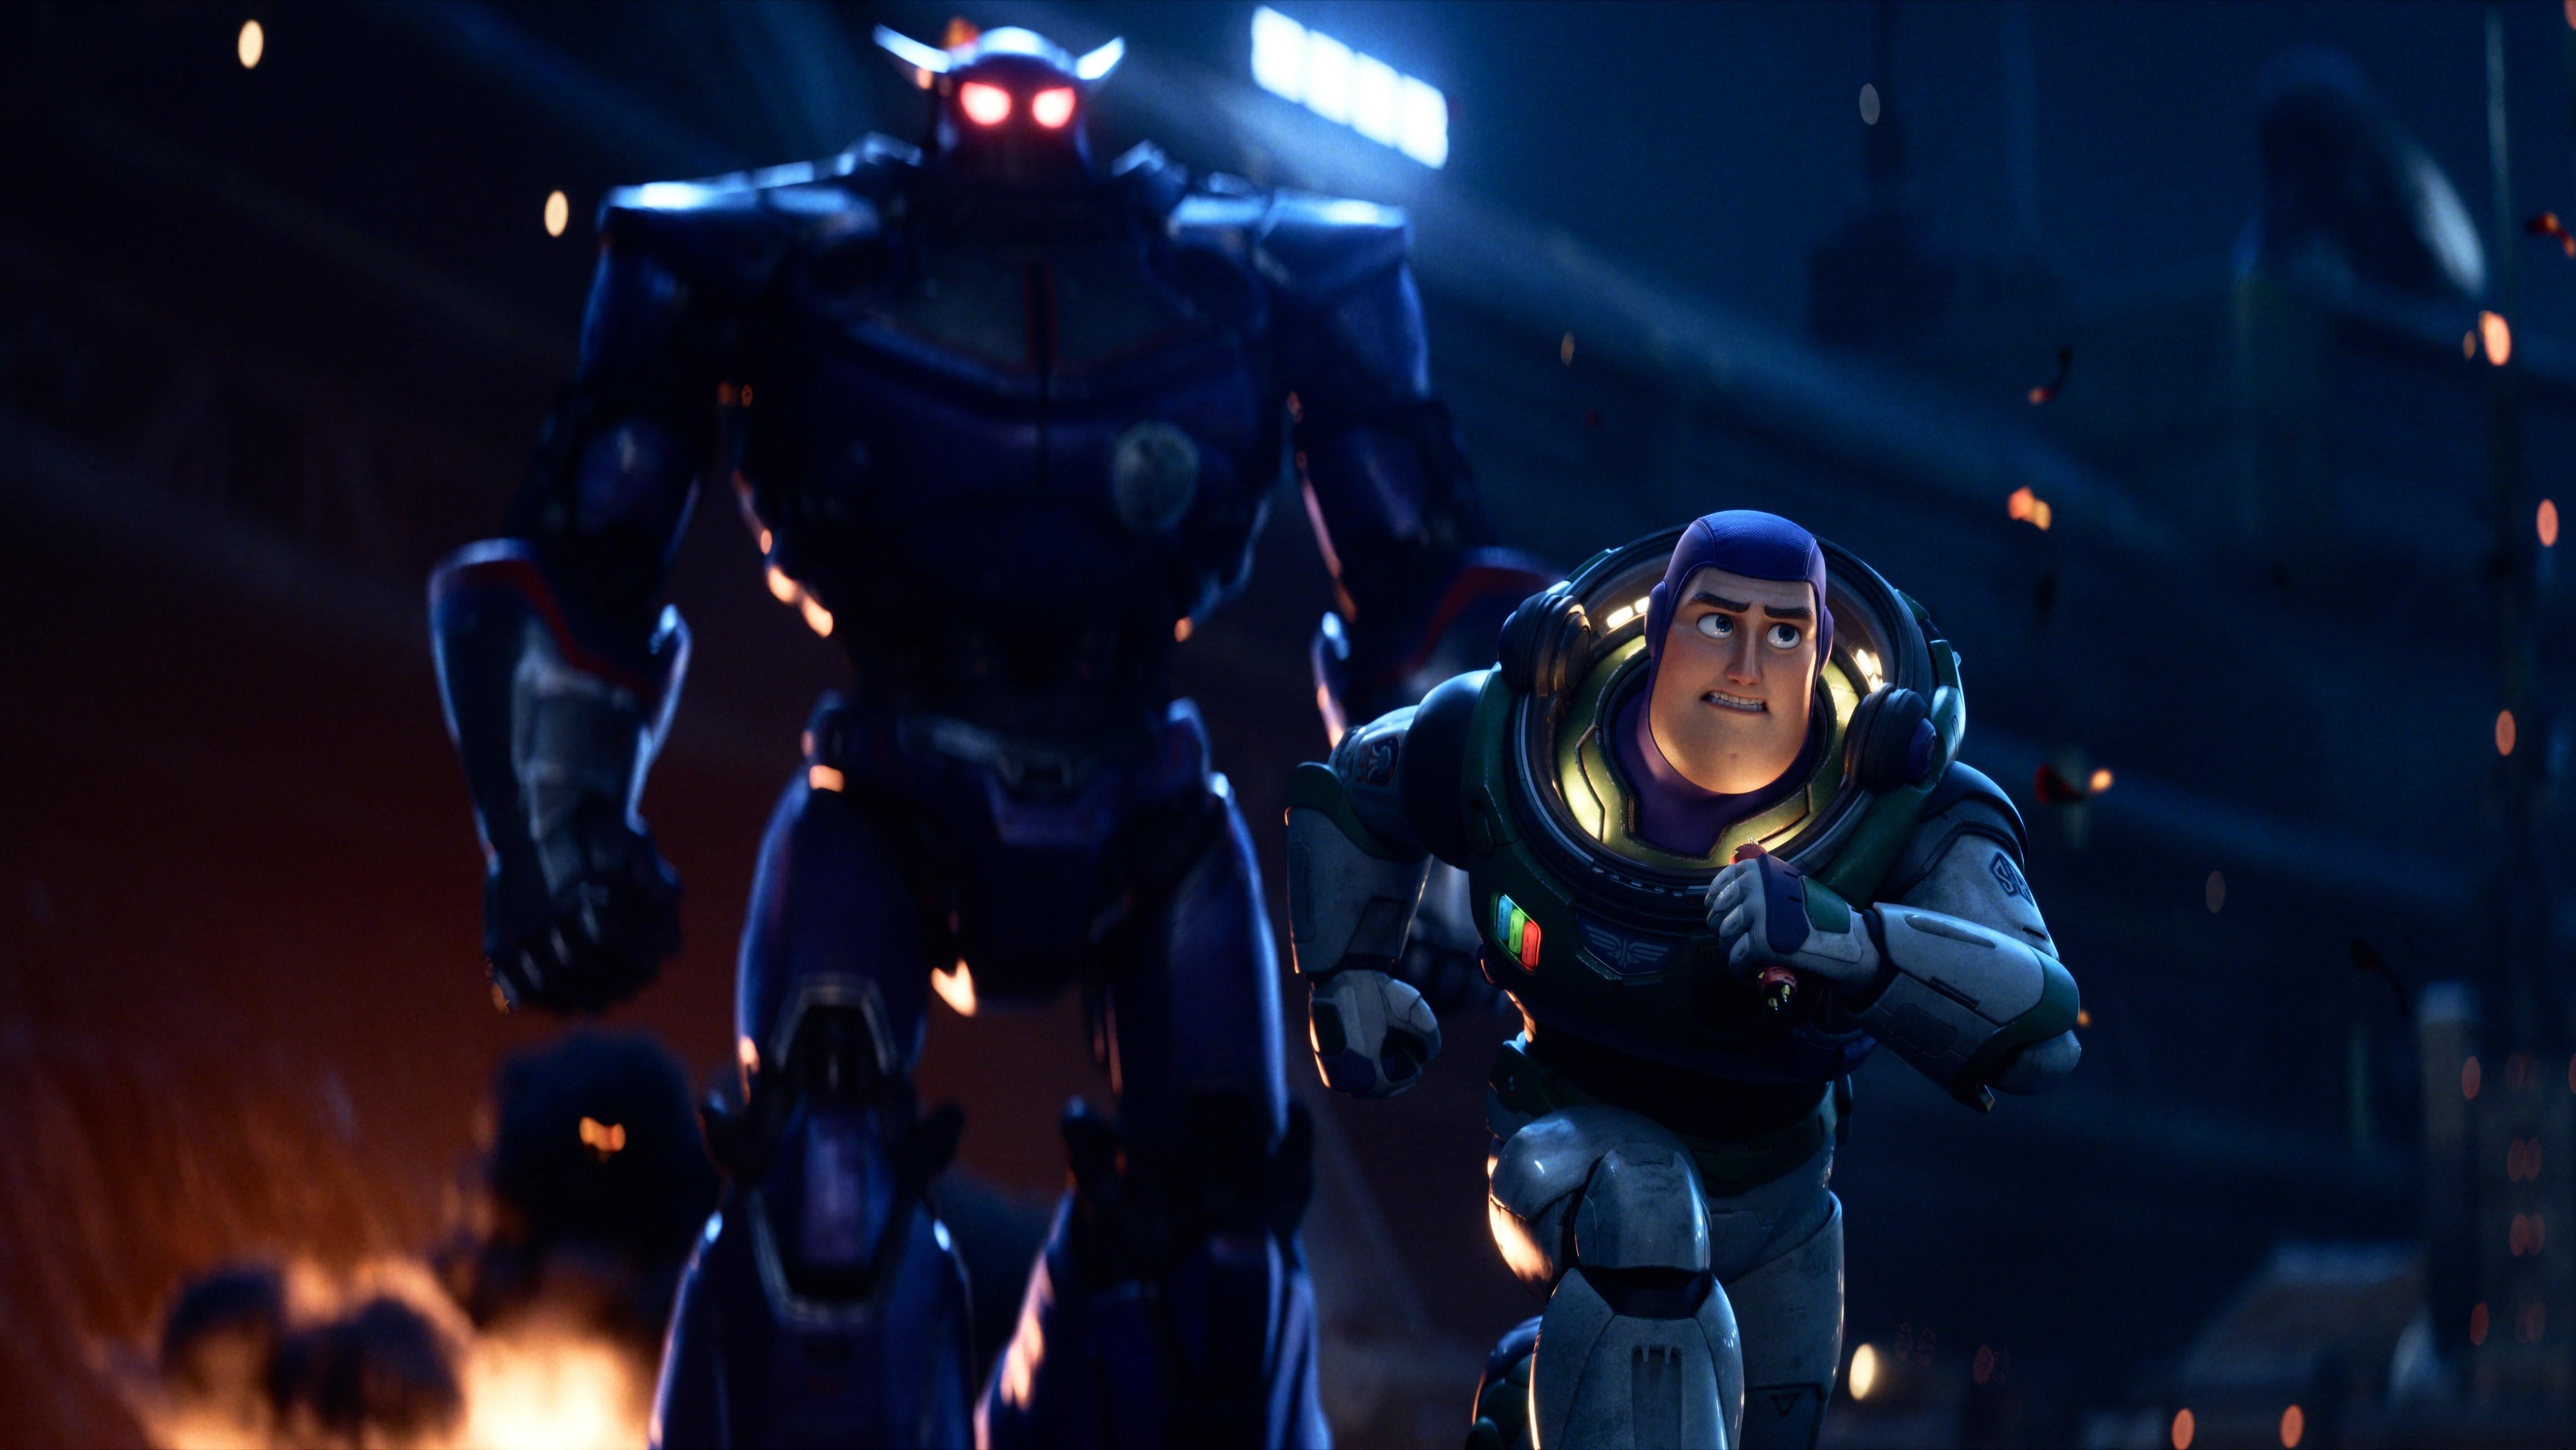 Of course Zurg, voiced by James Brolin, is in Lightyear. (Image: Pixar)